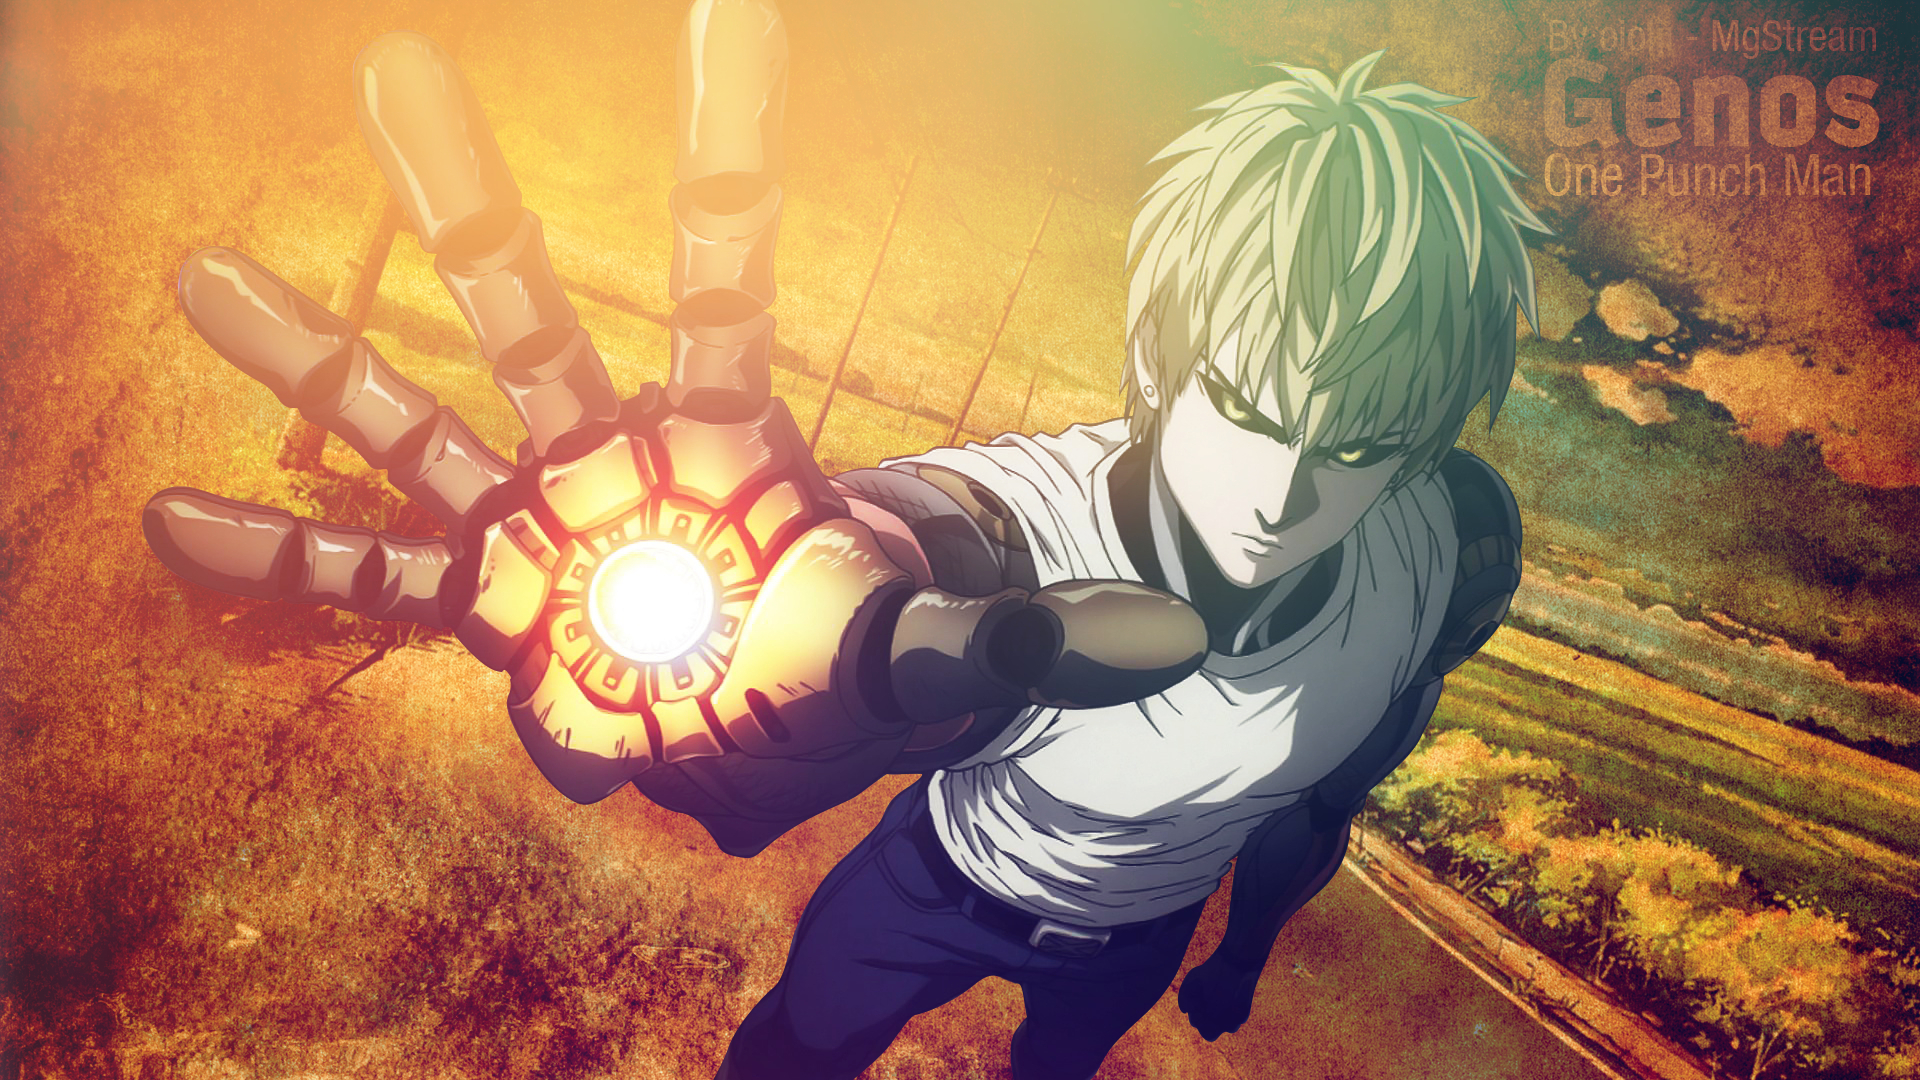 1920x1080 Anime One-Punch Man Genos (One-Punch Man) Wallpaper | One punch man, One punch, Anime one